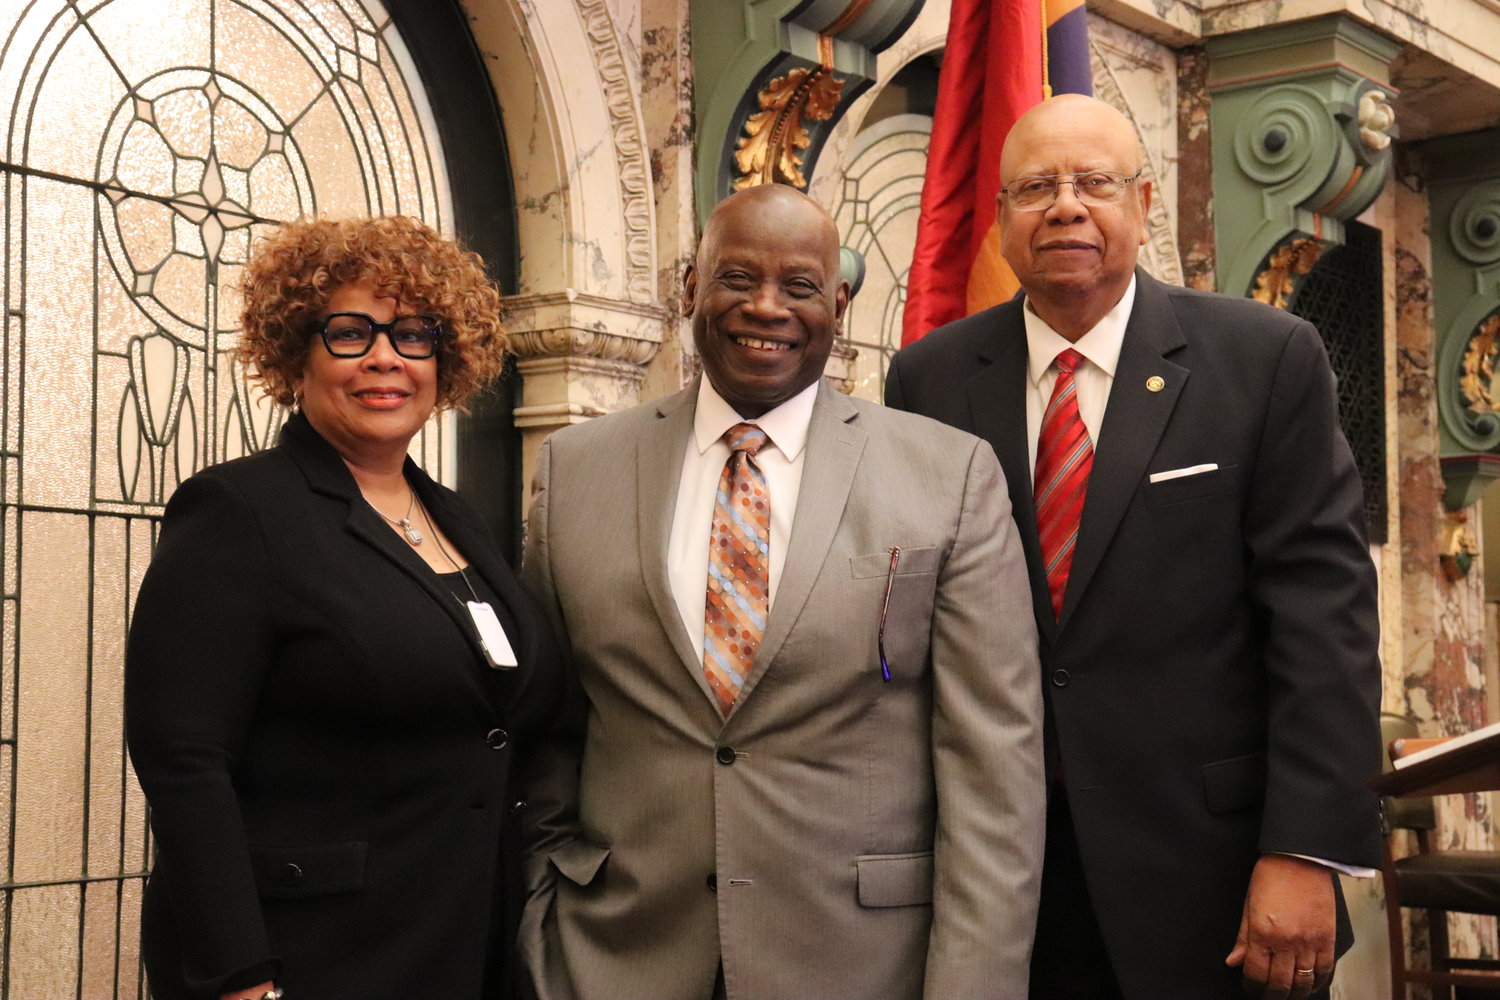 Senator Barbara Blackmon, left, and Senator Joseph Thomas, right, visited with Canton Mayor William Truly, center, at the Capitol on Monday, January 30, 2023, after a funding related meeting.